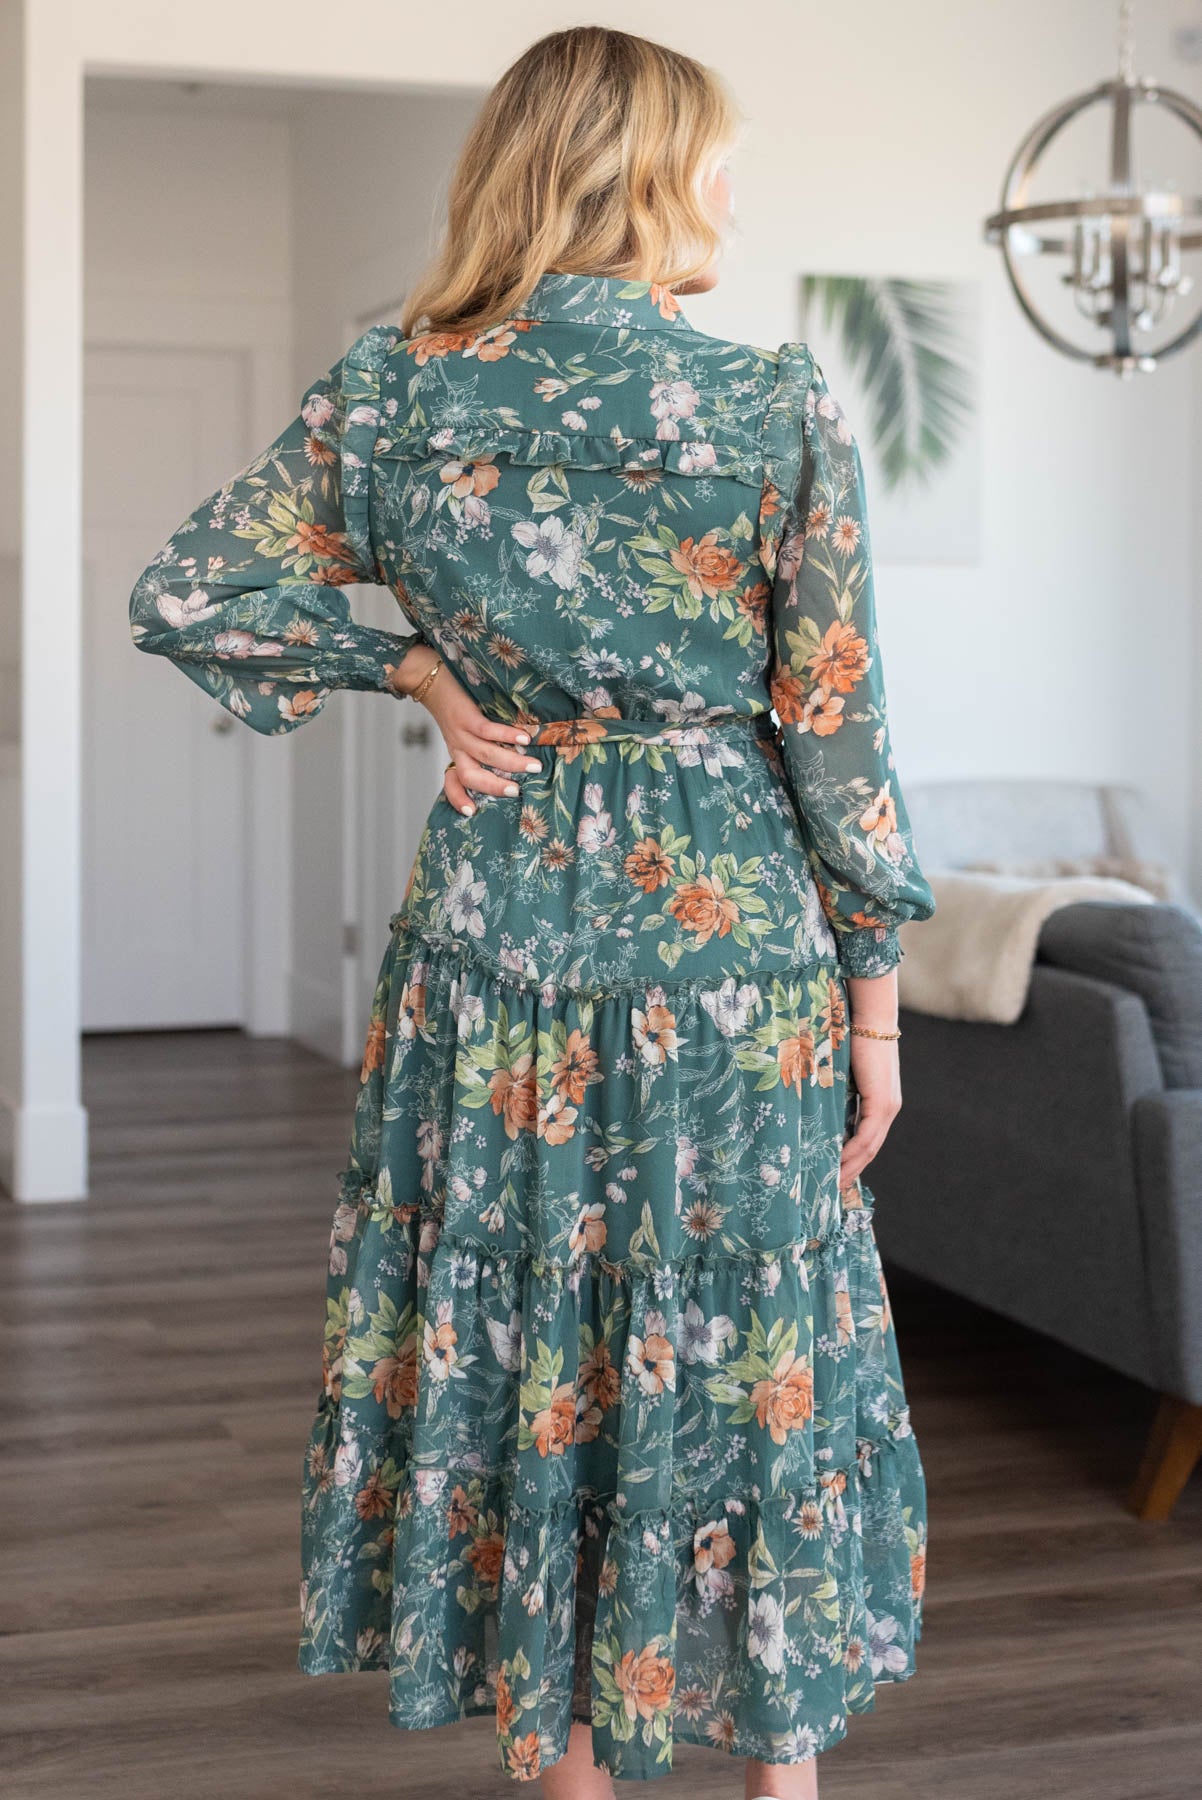 Back view of a dark green floral dress